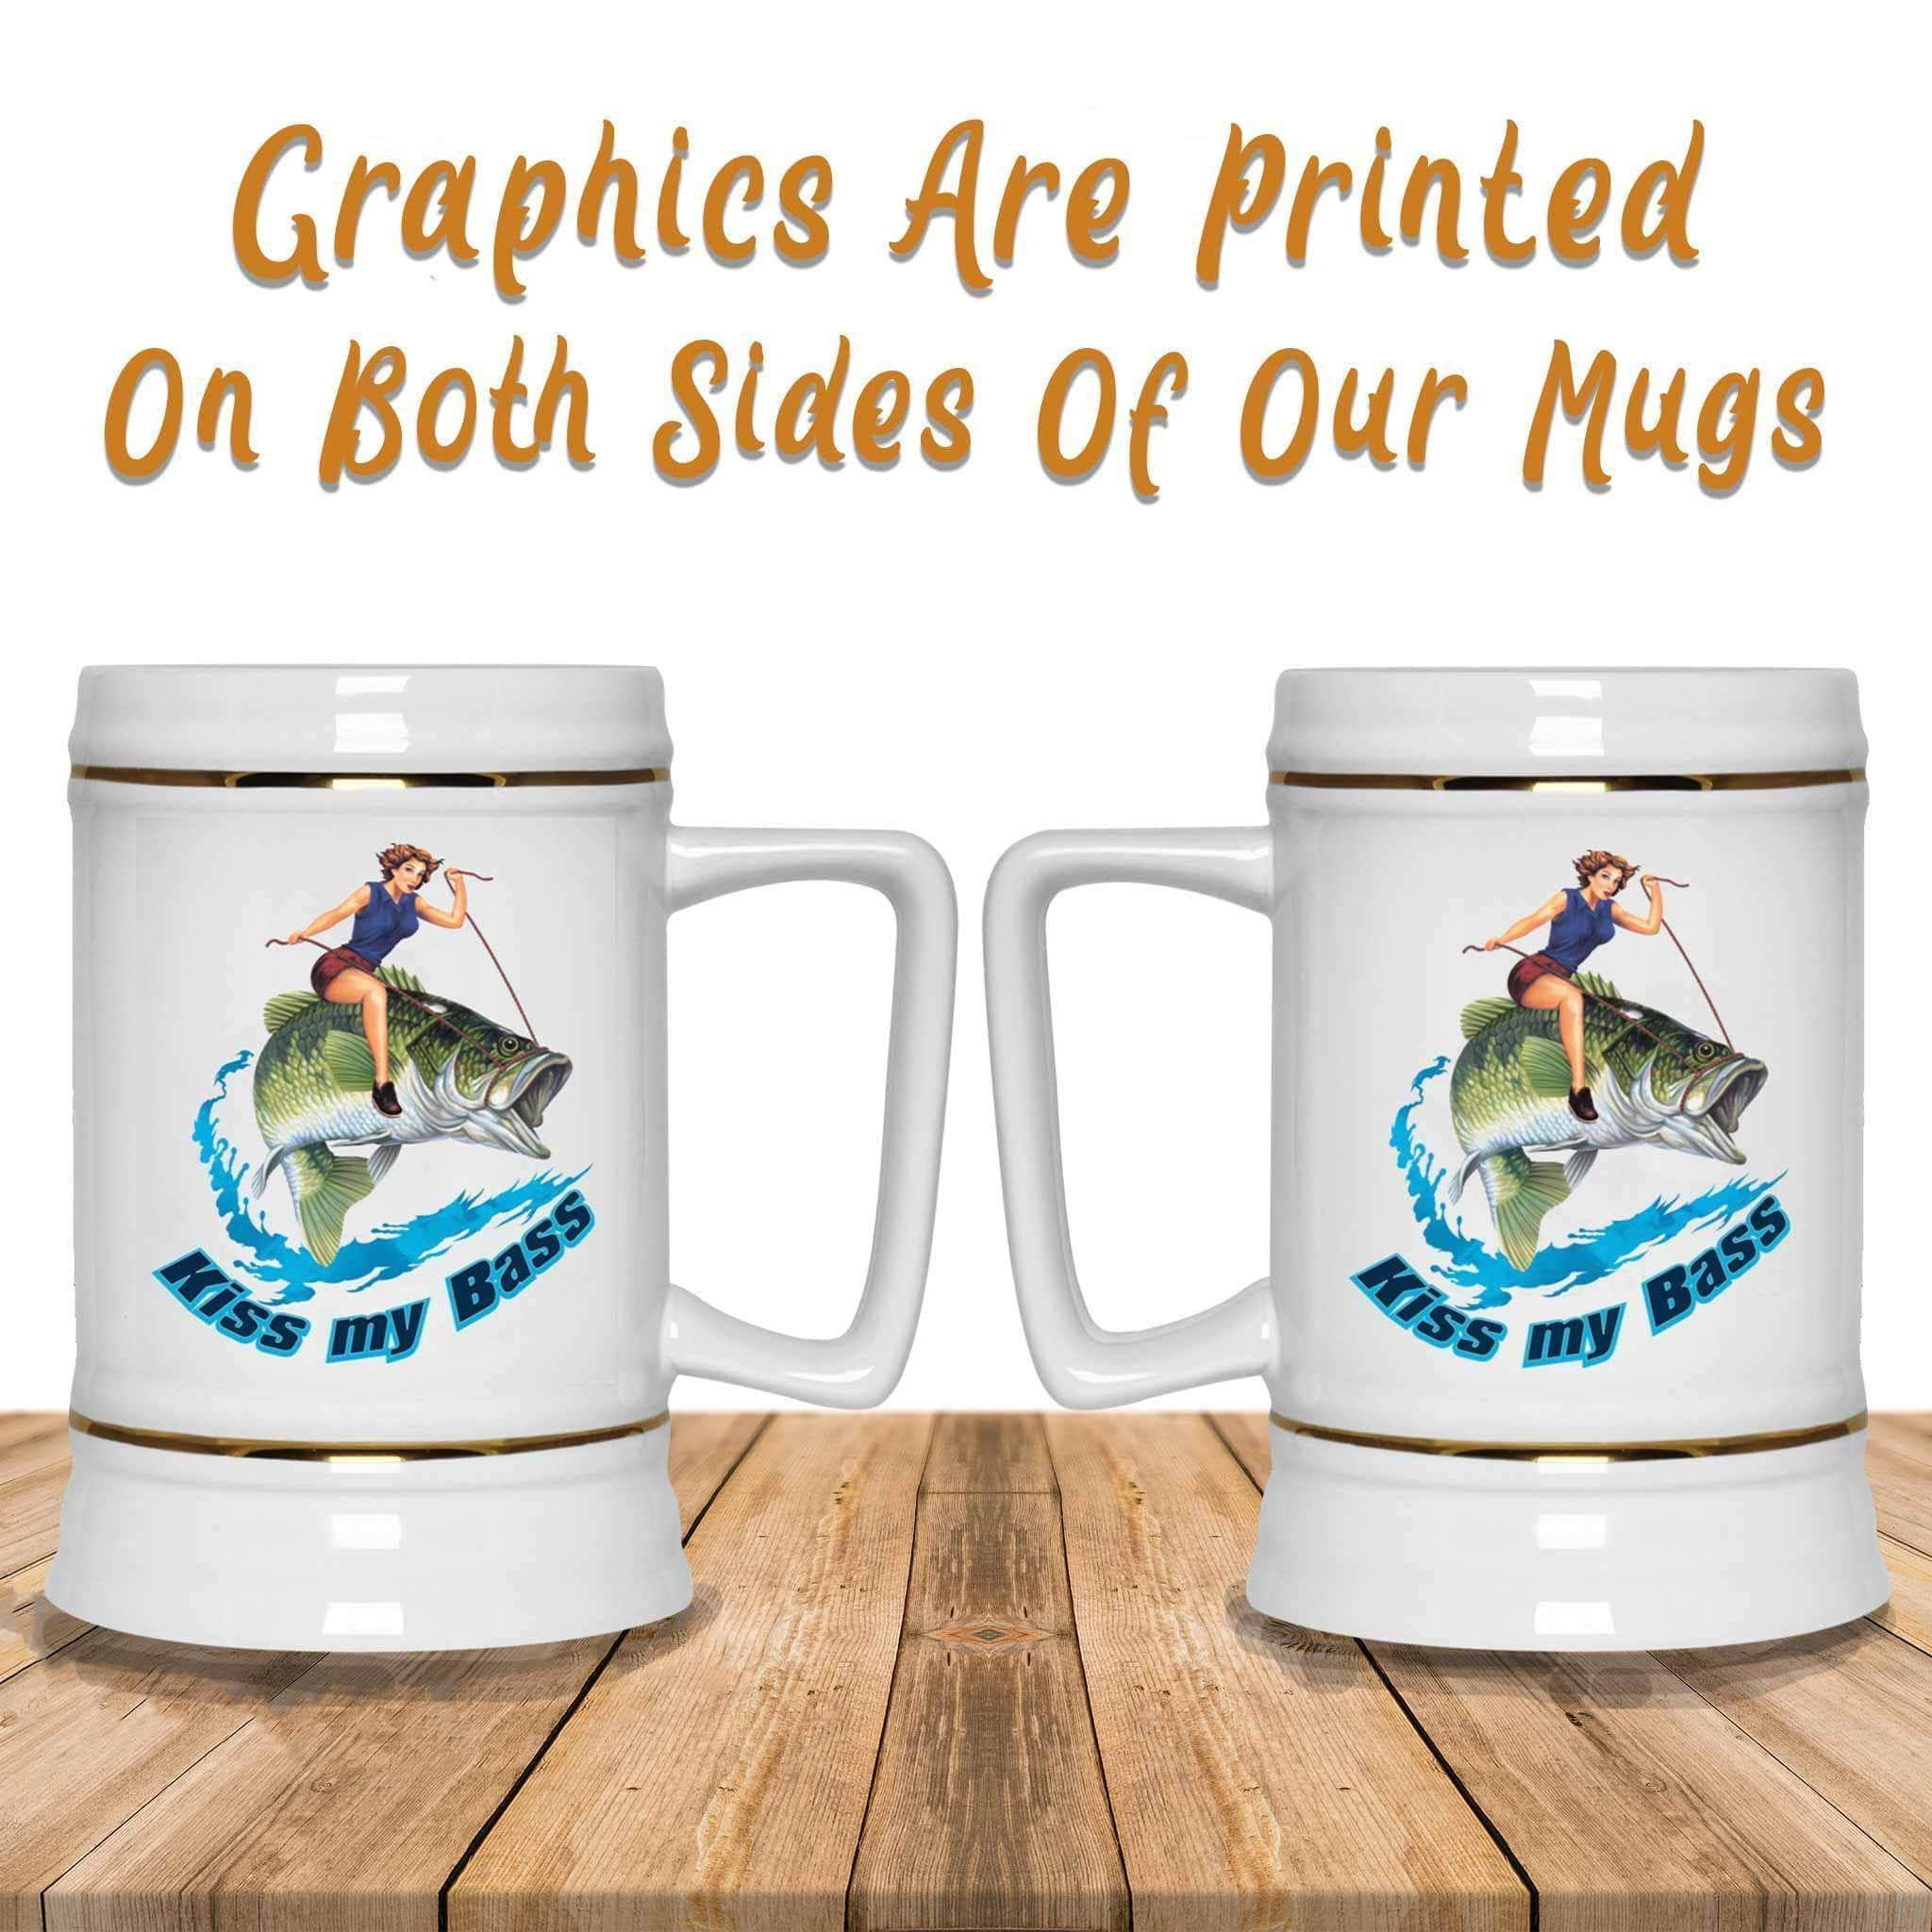 Kiss My Bass Brunette Pin Up Girl Riding A Bass Fish Fishing Themed White Beer MugCustomly Gifts